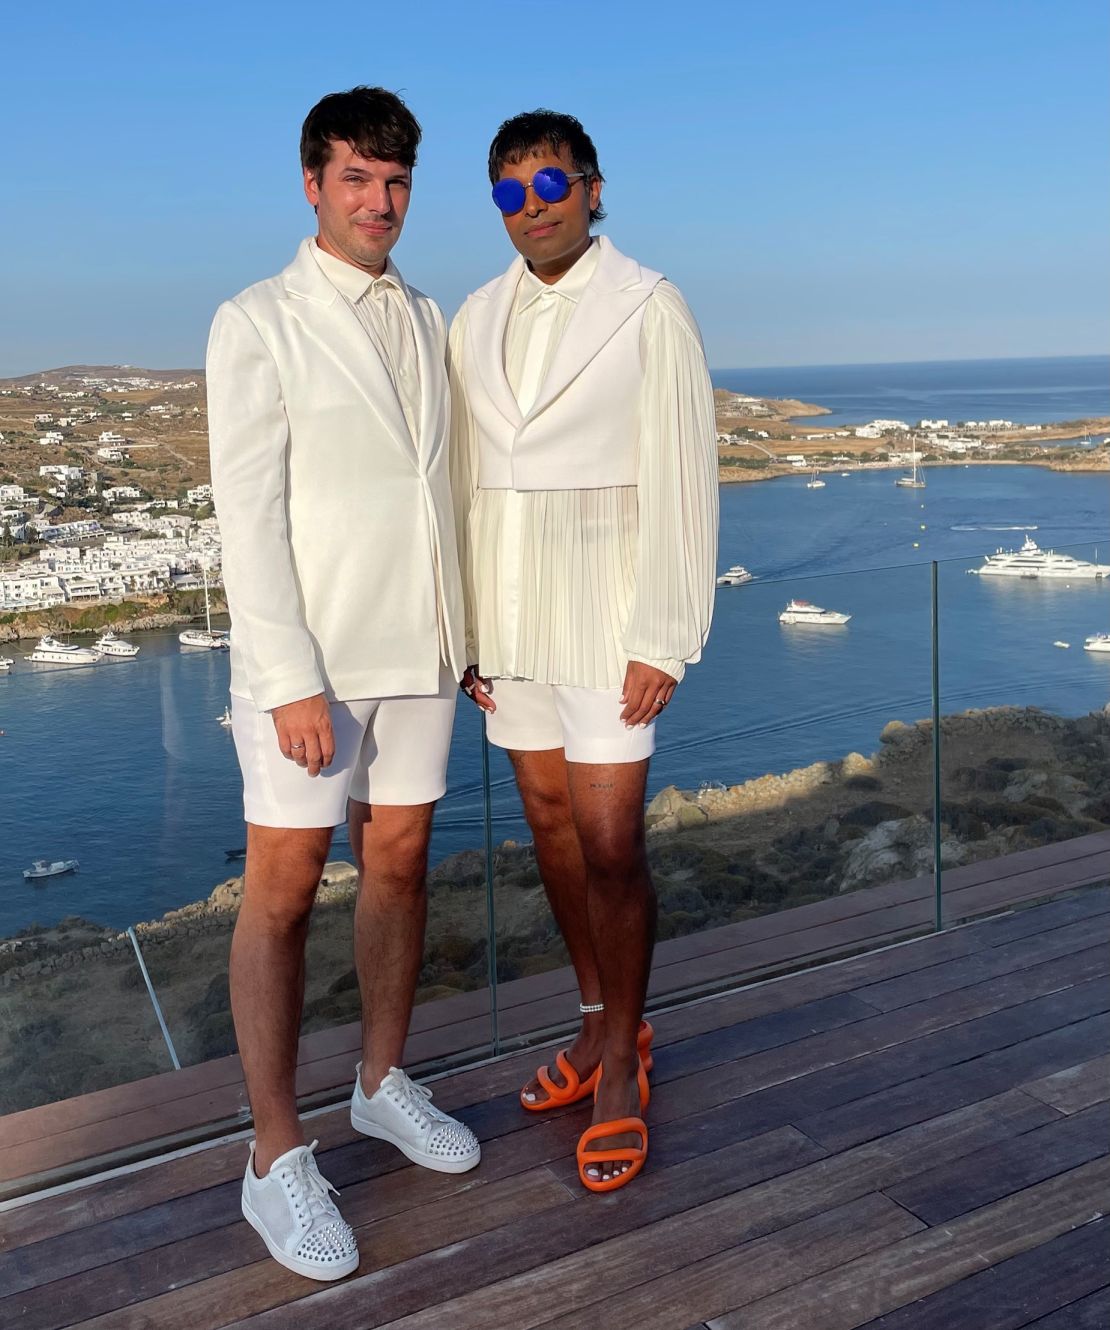 Suki and Manuel in Mykonos, Greece. The couple love traveling together.